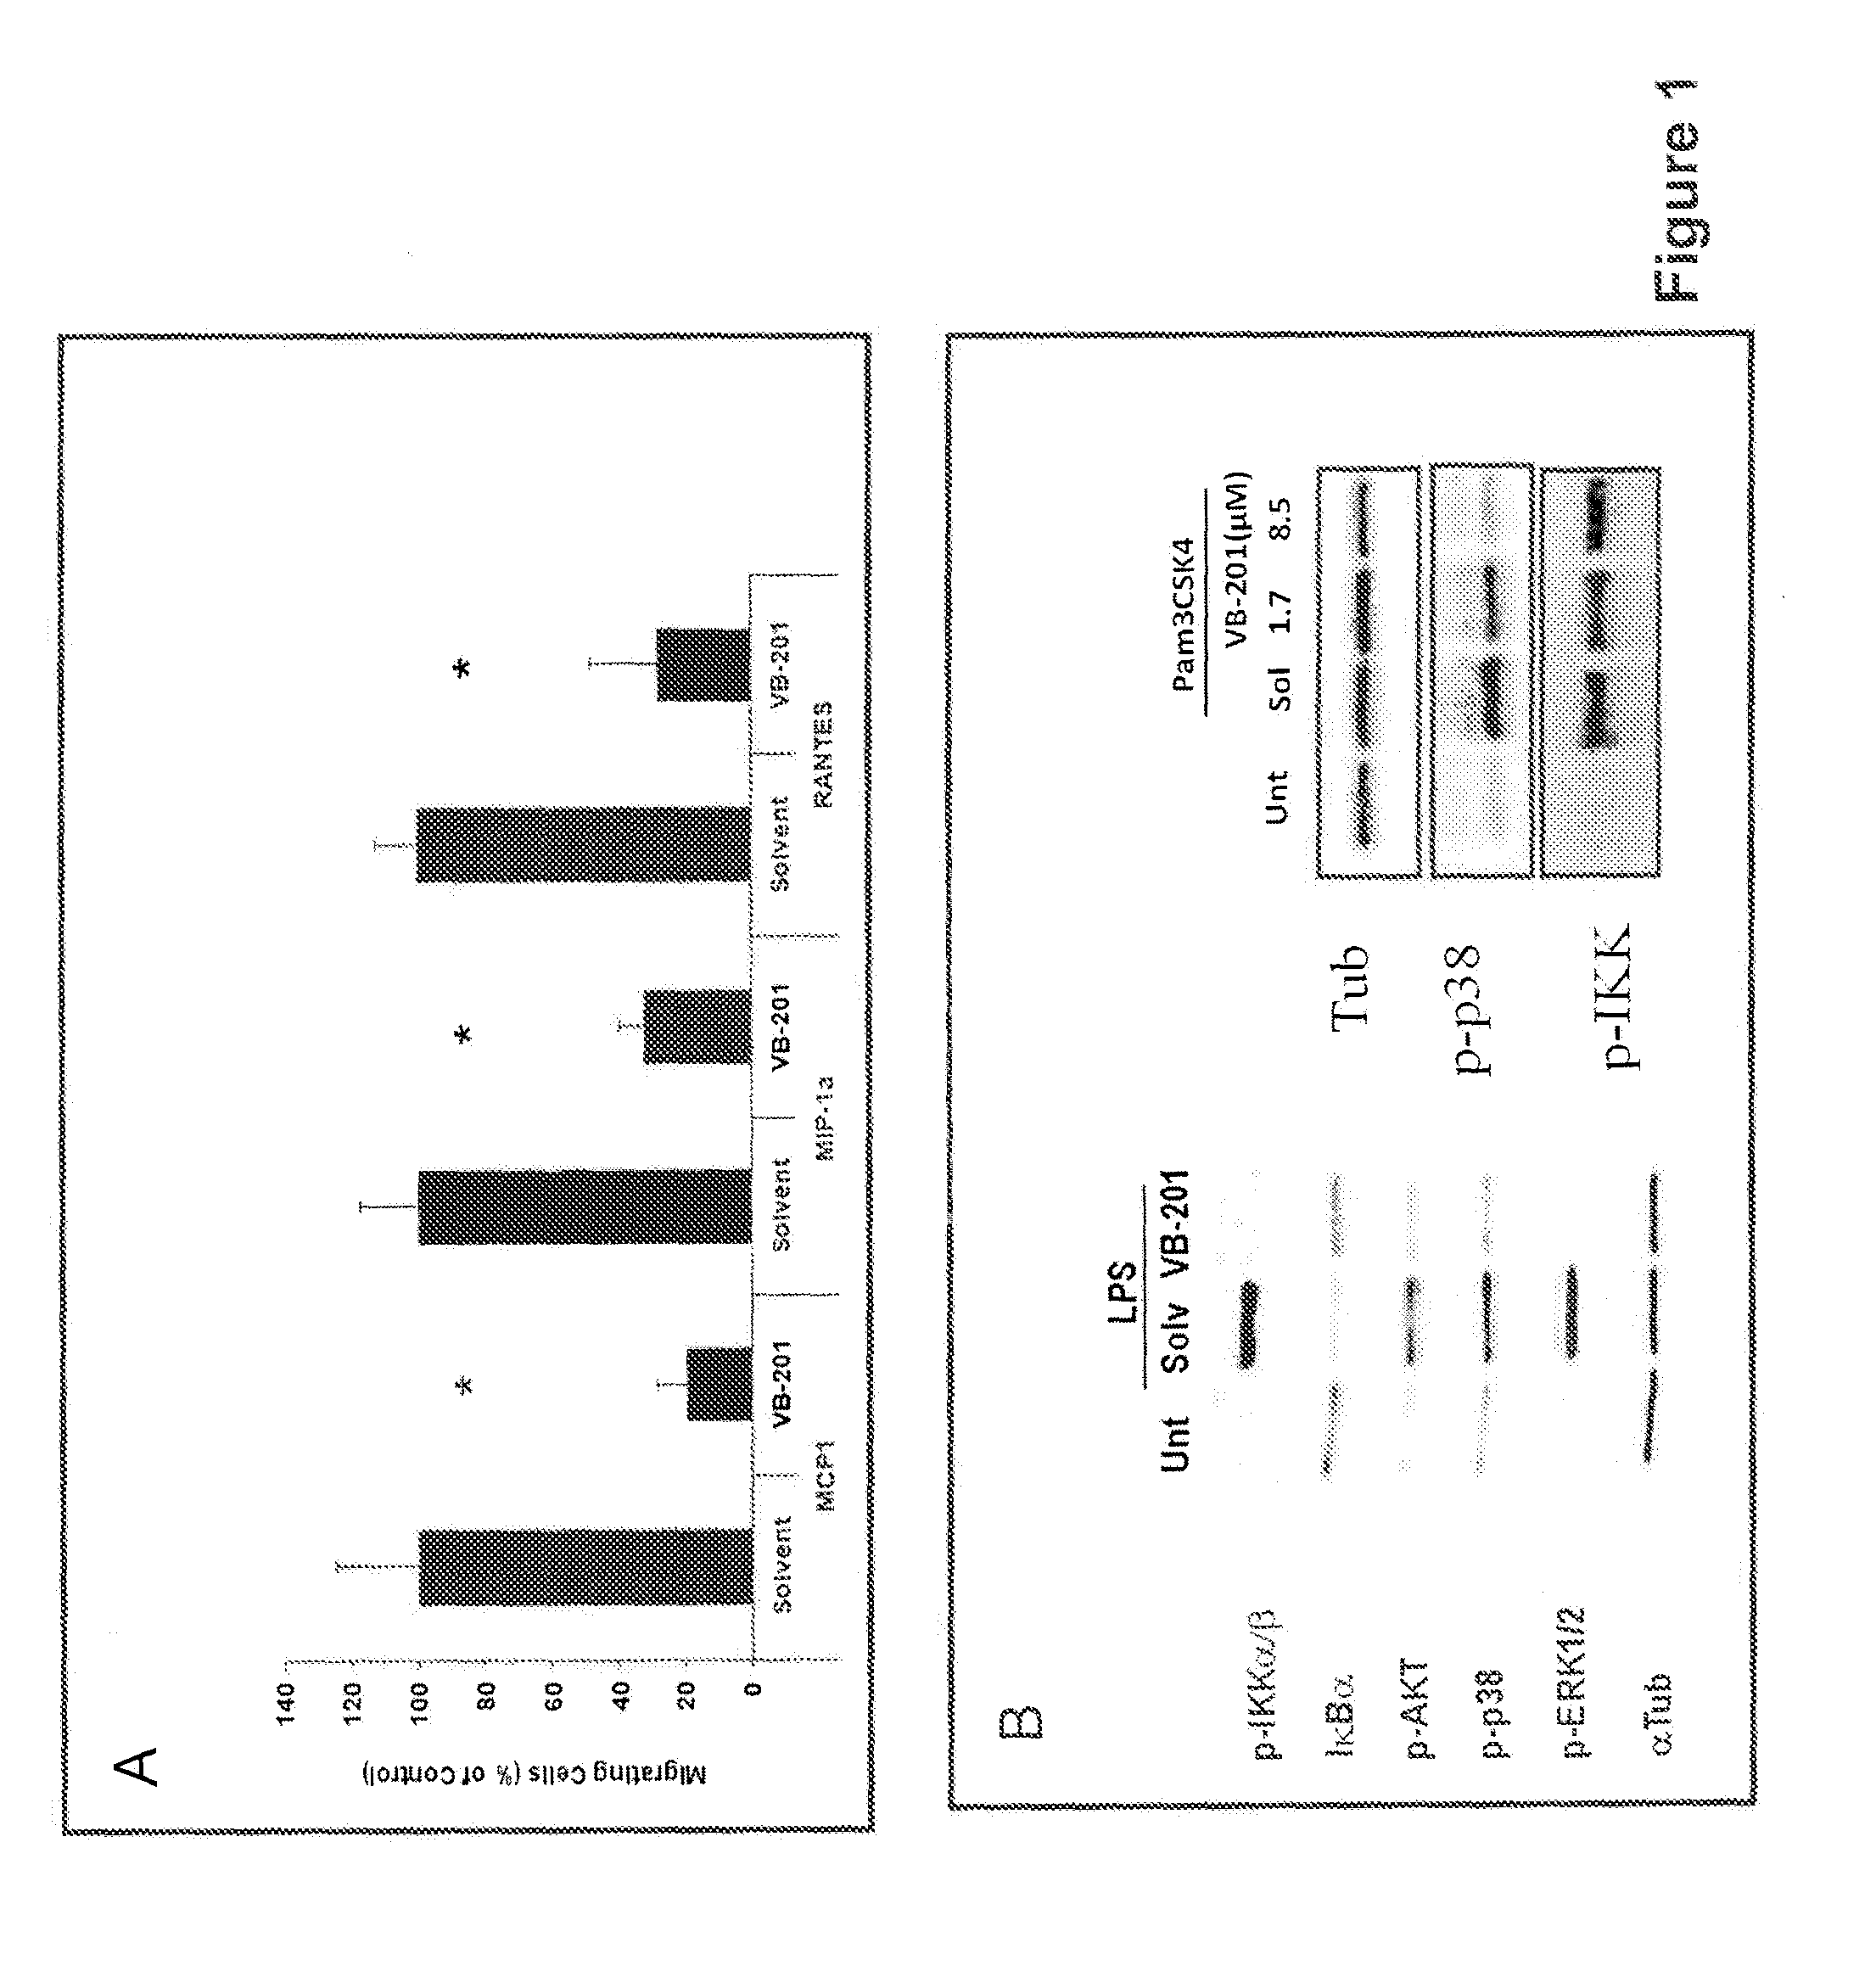 Methods for treating psoriasis and vascular inflammation